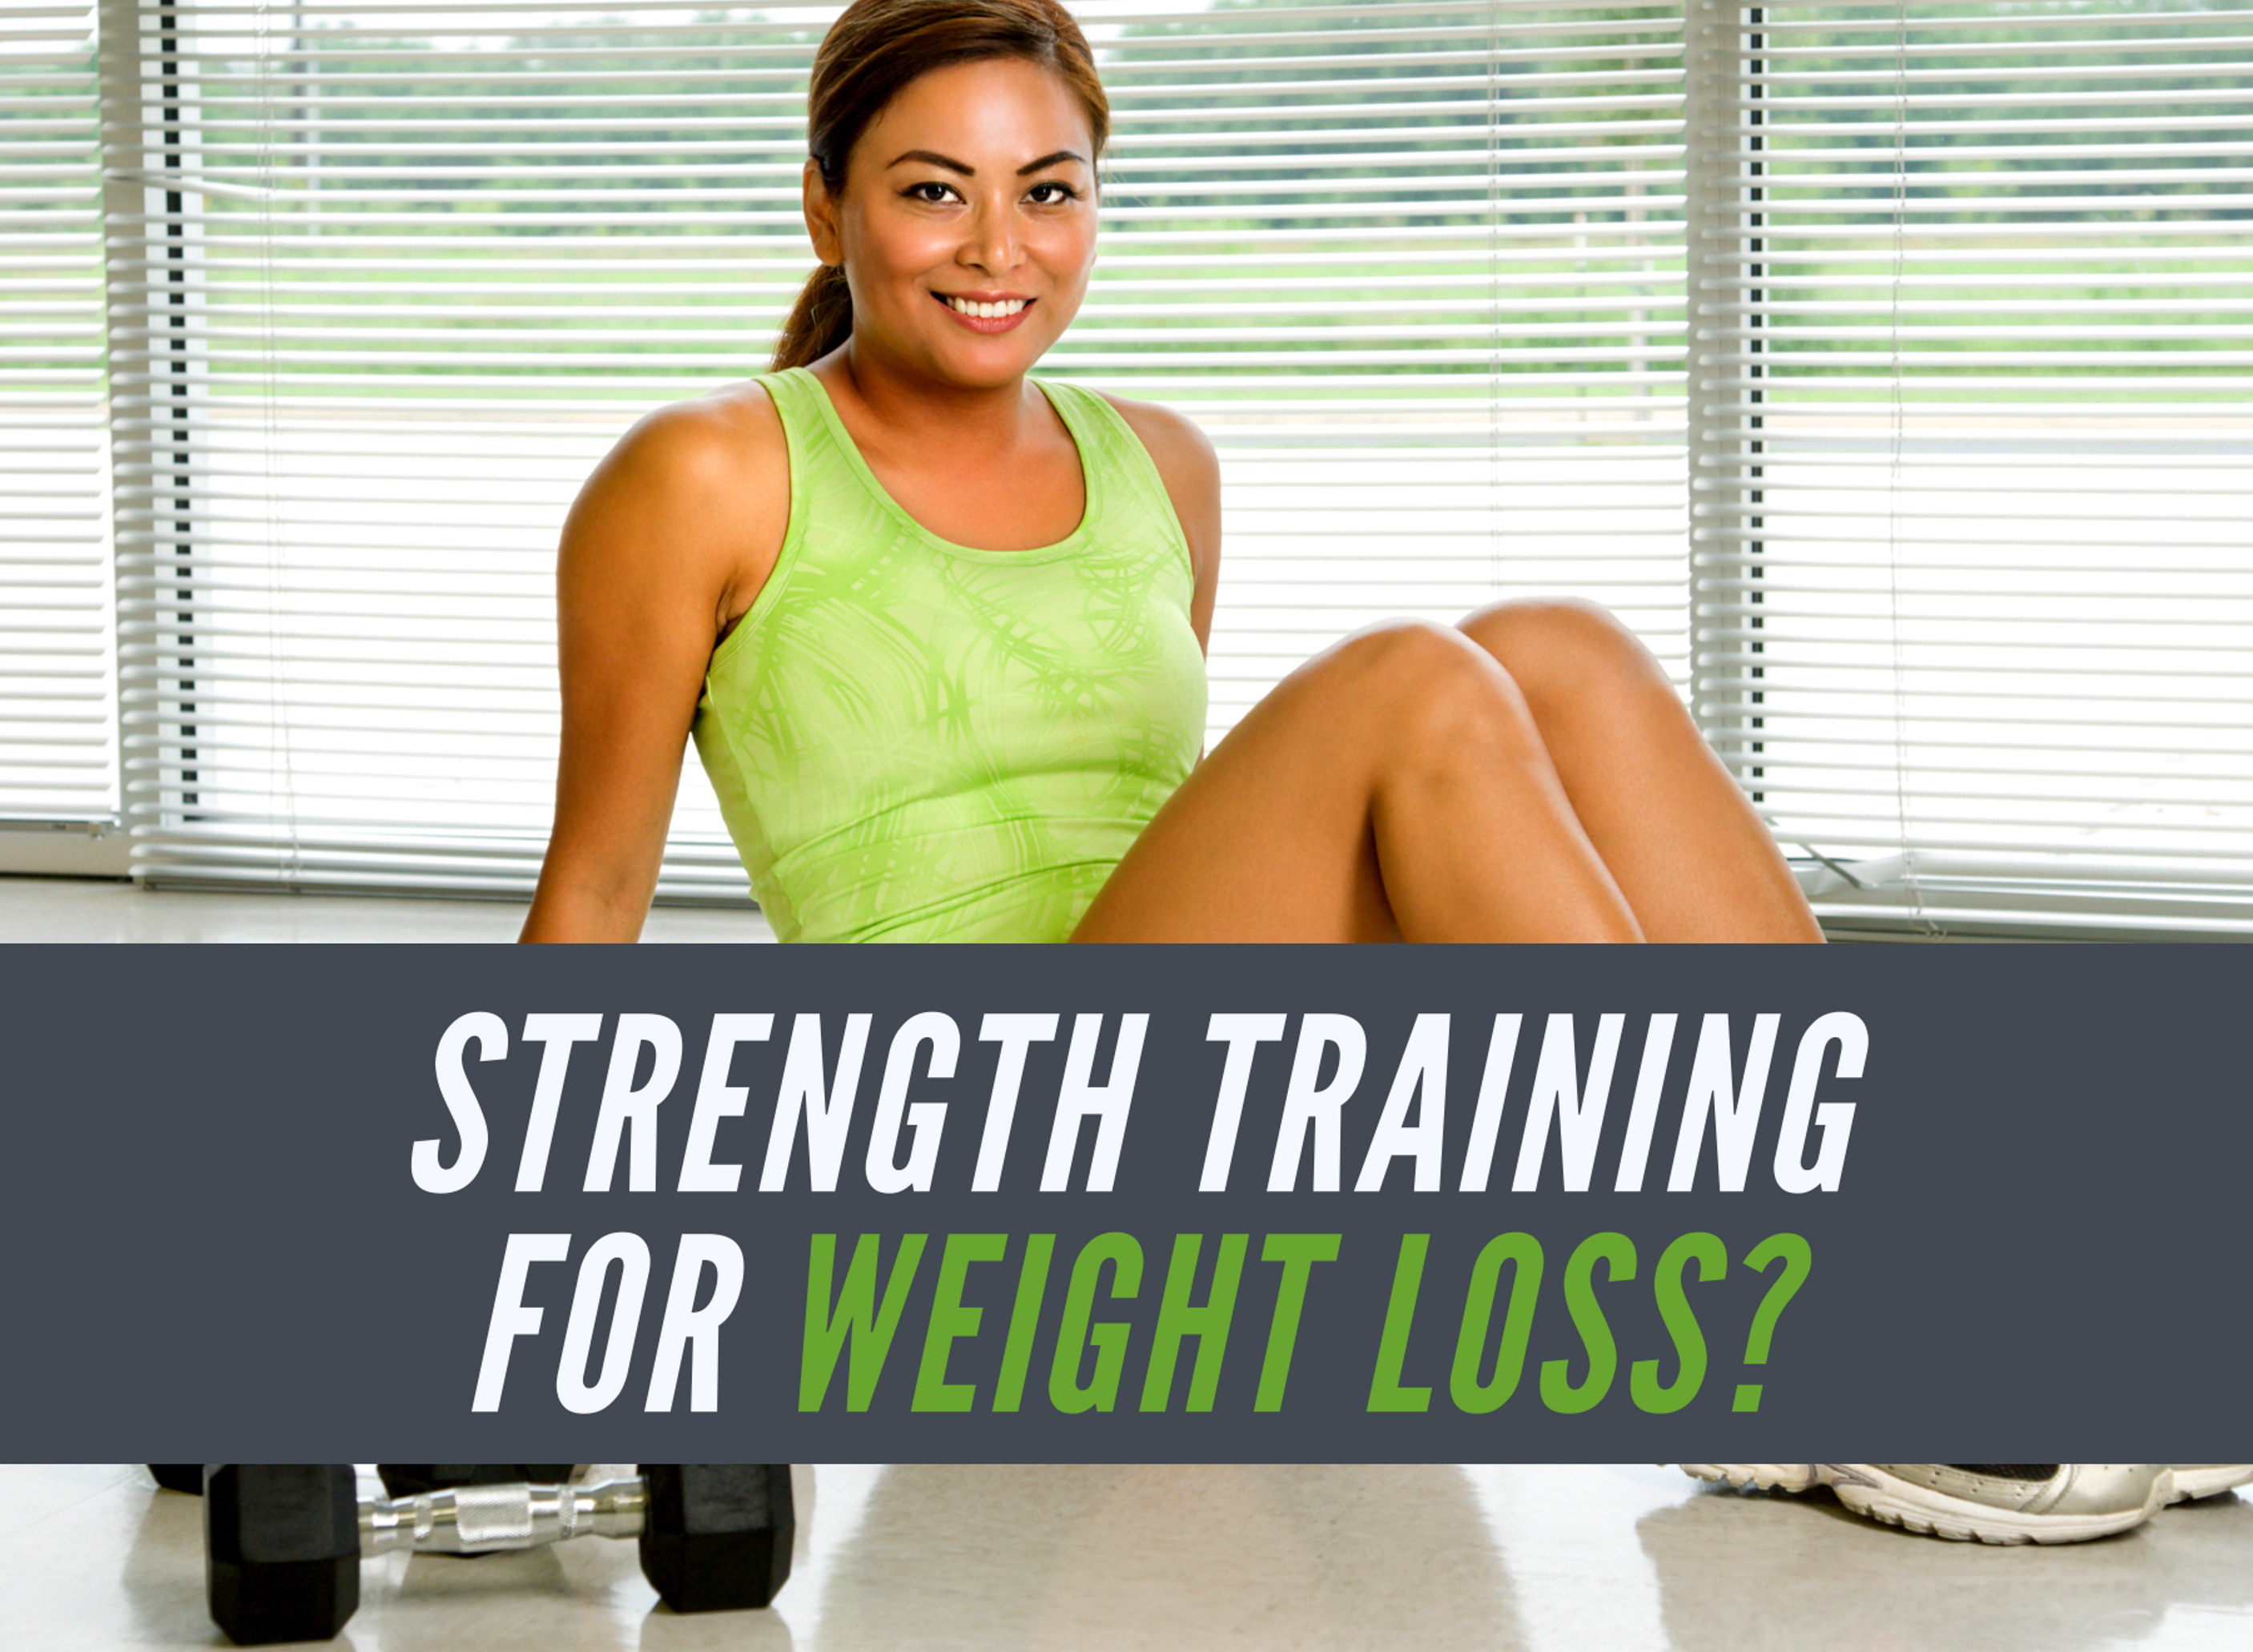 Strength Training for Weight Loss?